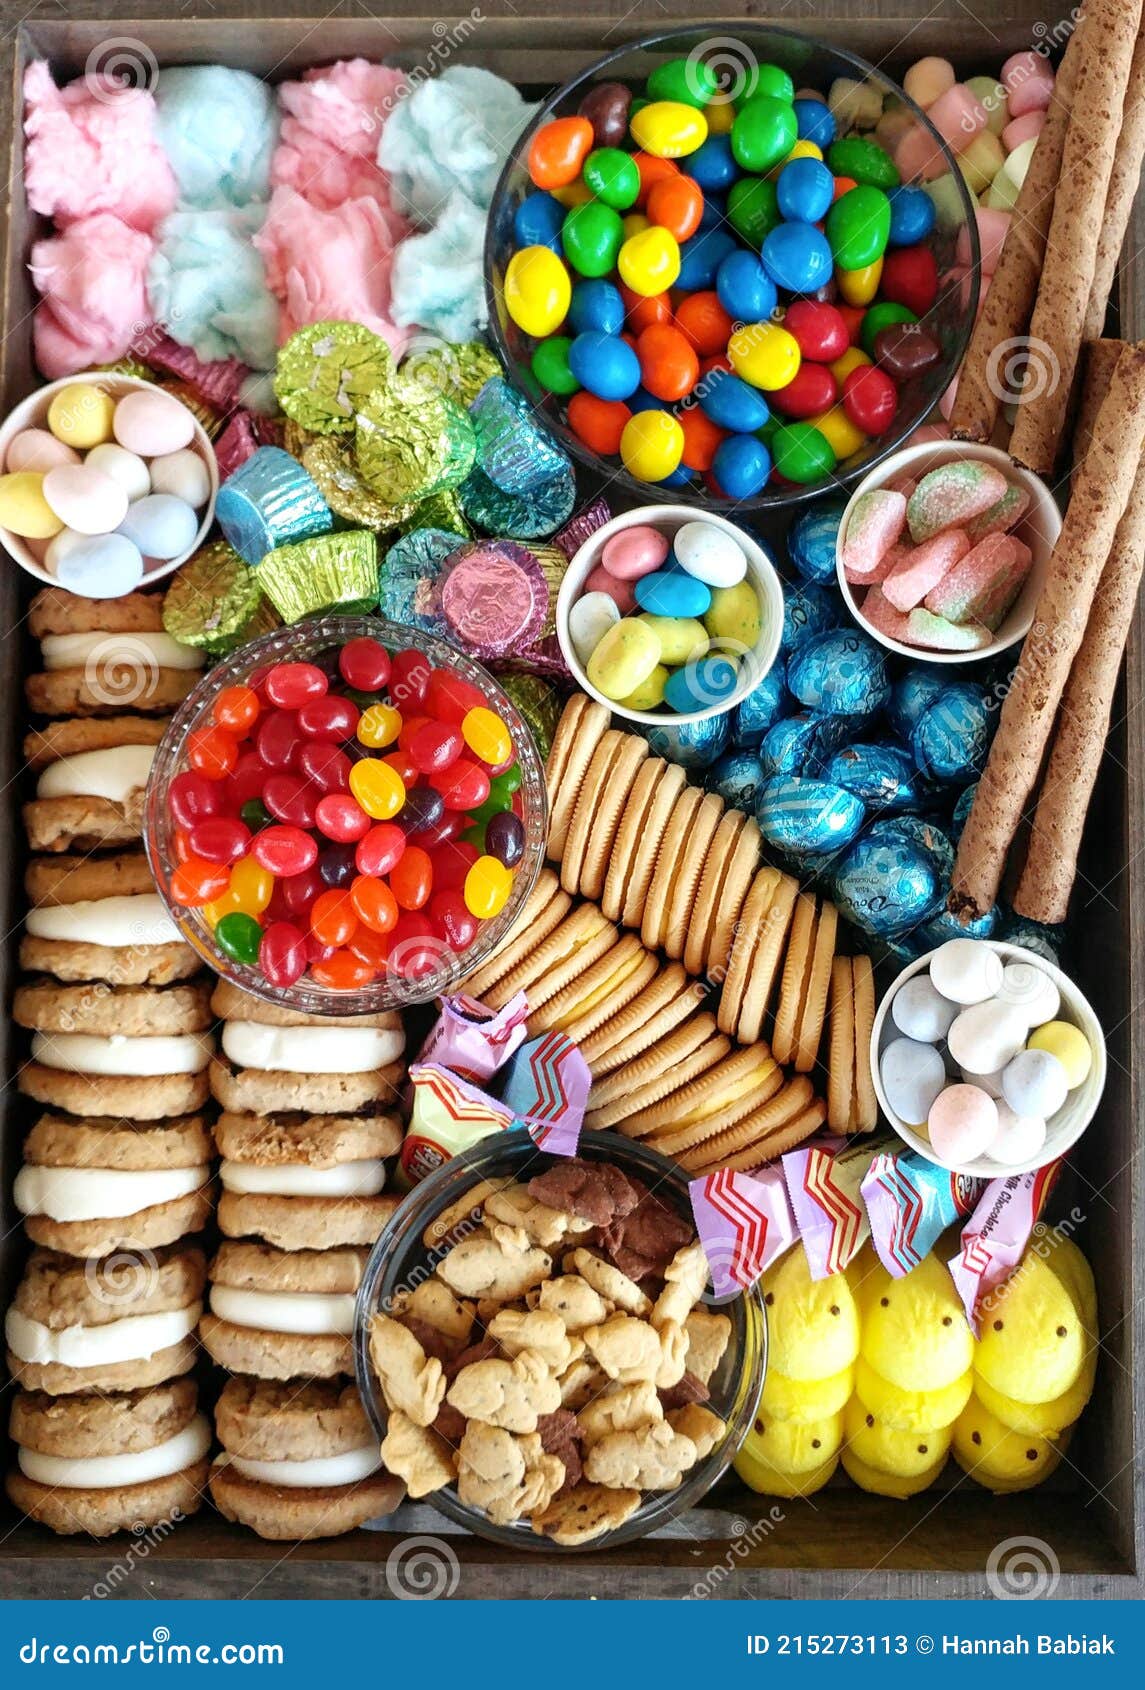 candy and cookie charcuterie board